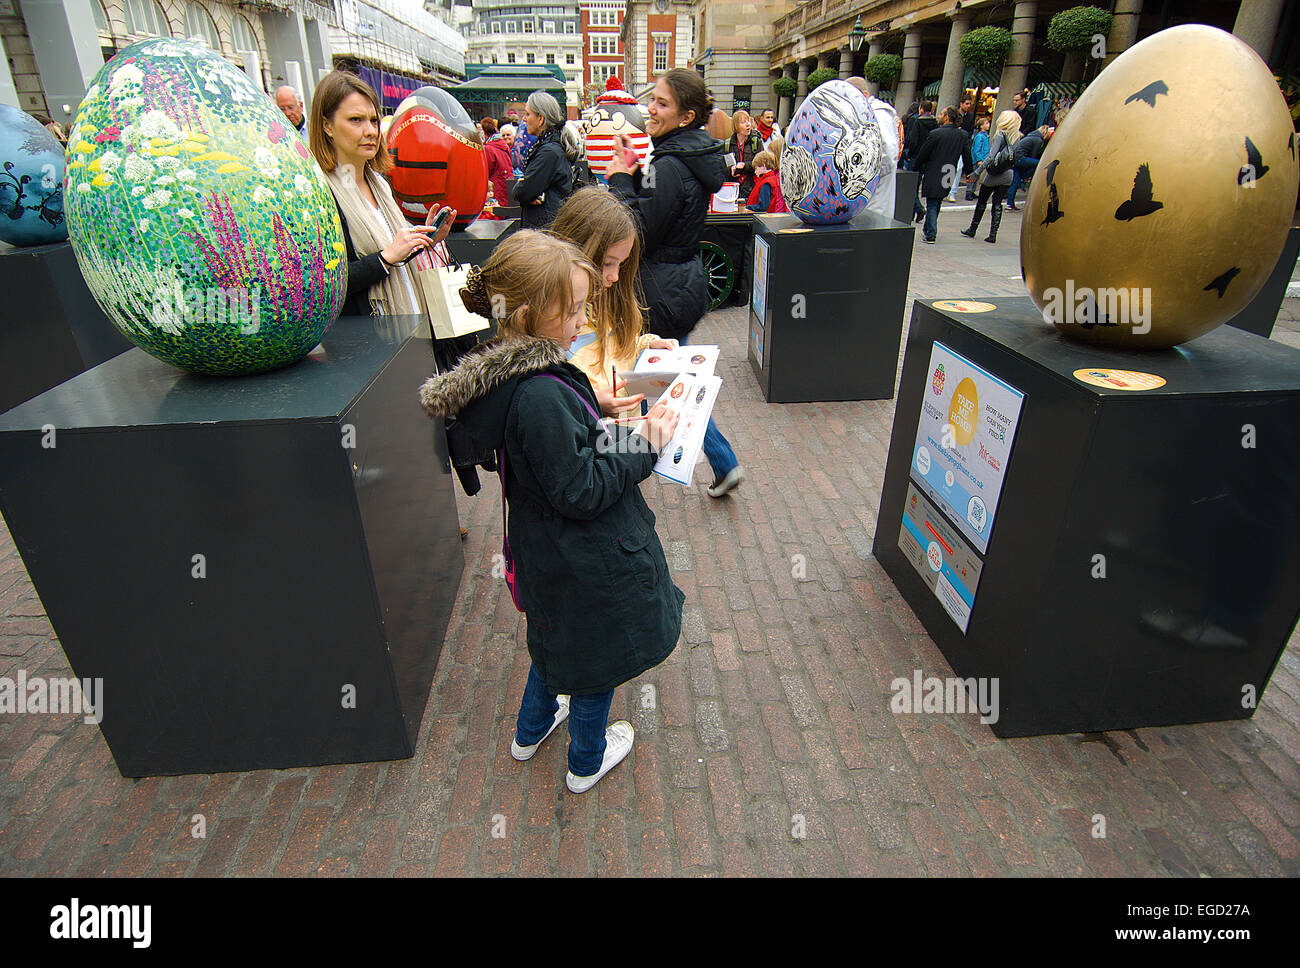 In February 2012, beautiful 2 ½ foot high eggs started appearing round central London, each designed by a different person. At E Stock Photo